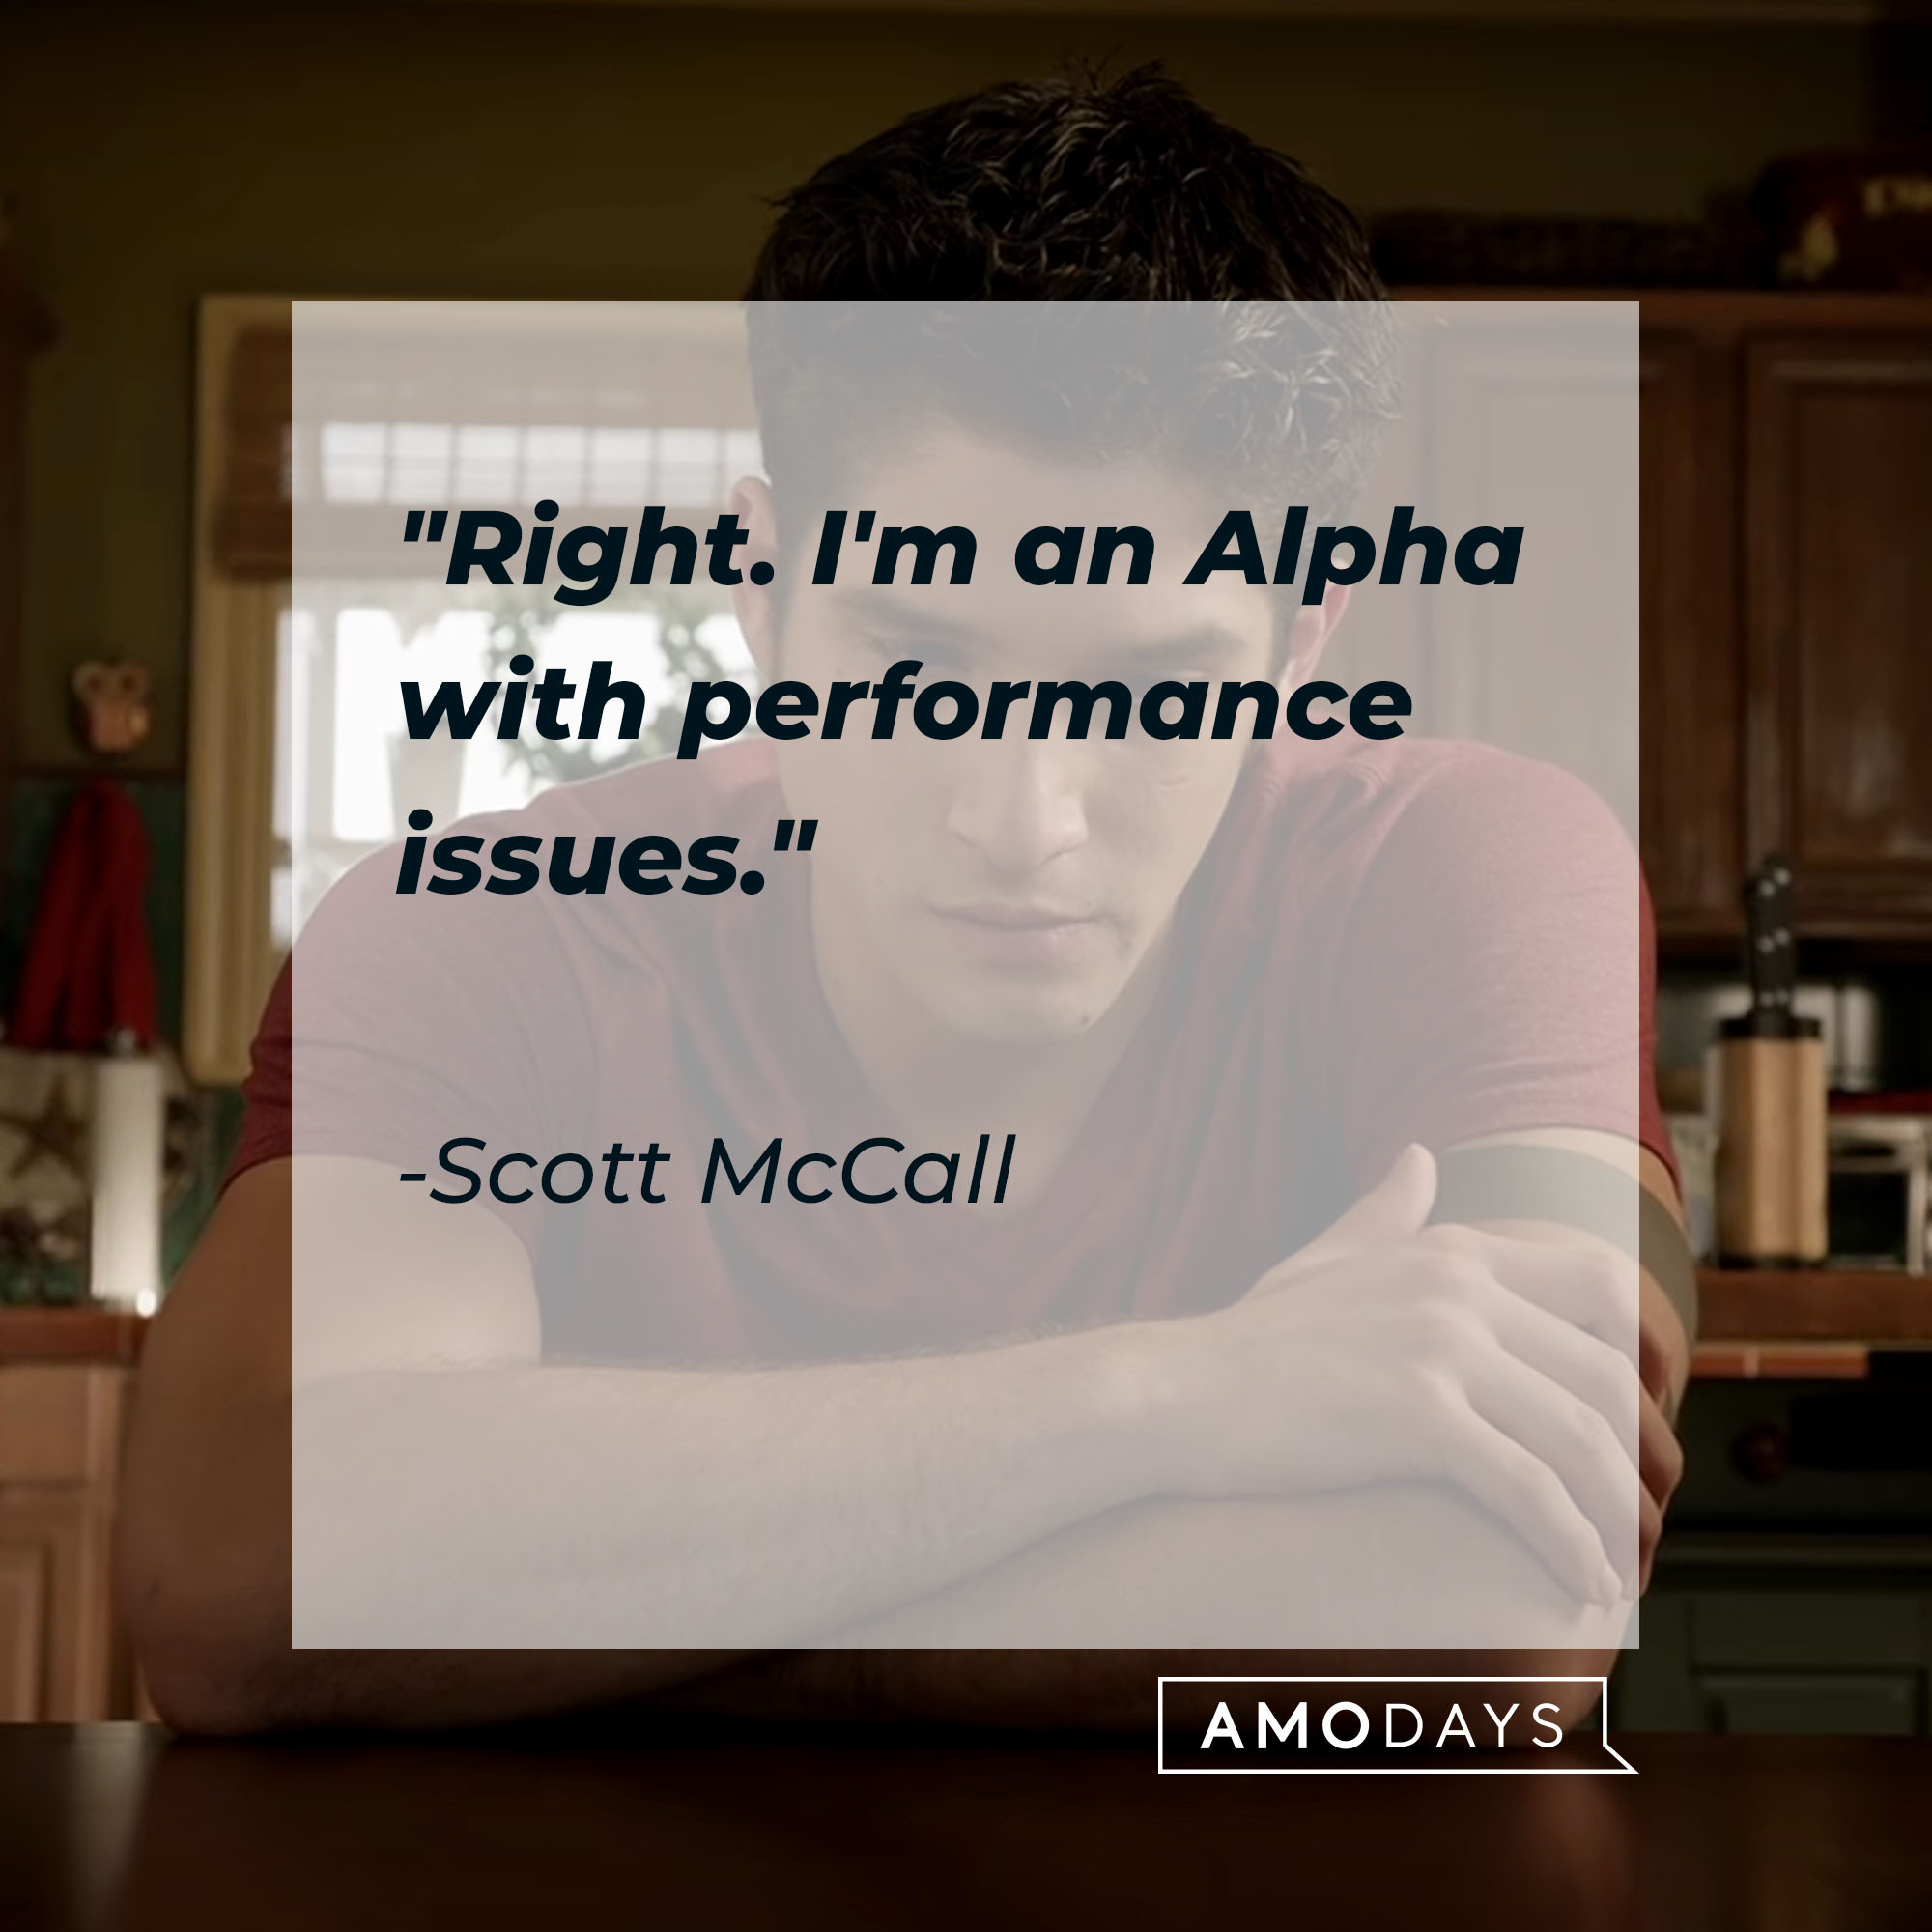 Scott McCall's quote: "Right. I'm an Alpha with performance issues" | Source: Youtube.com/WolfWatch